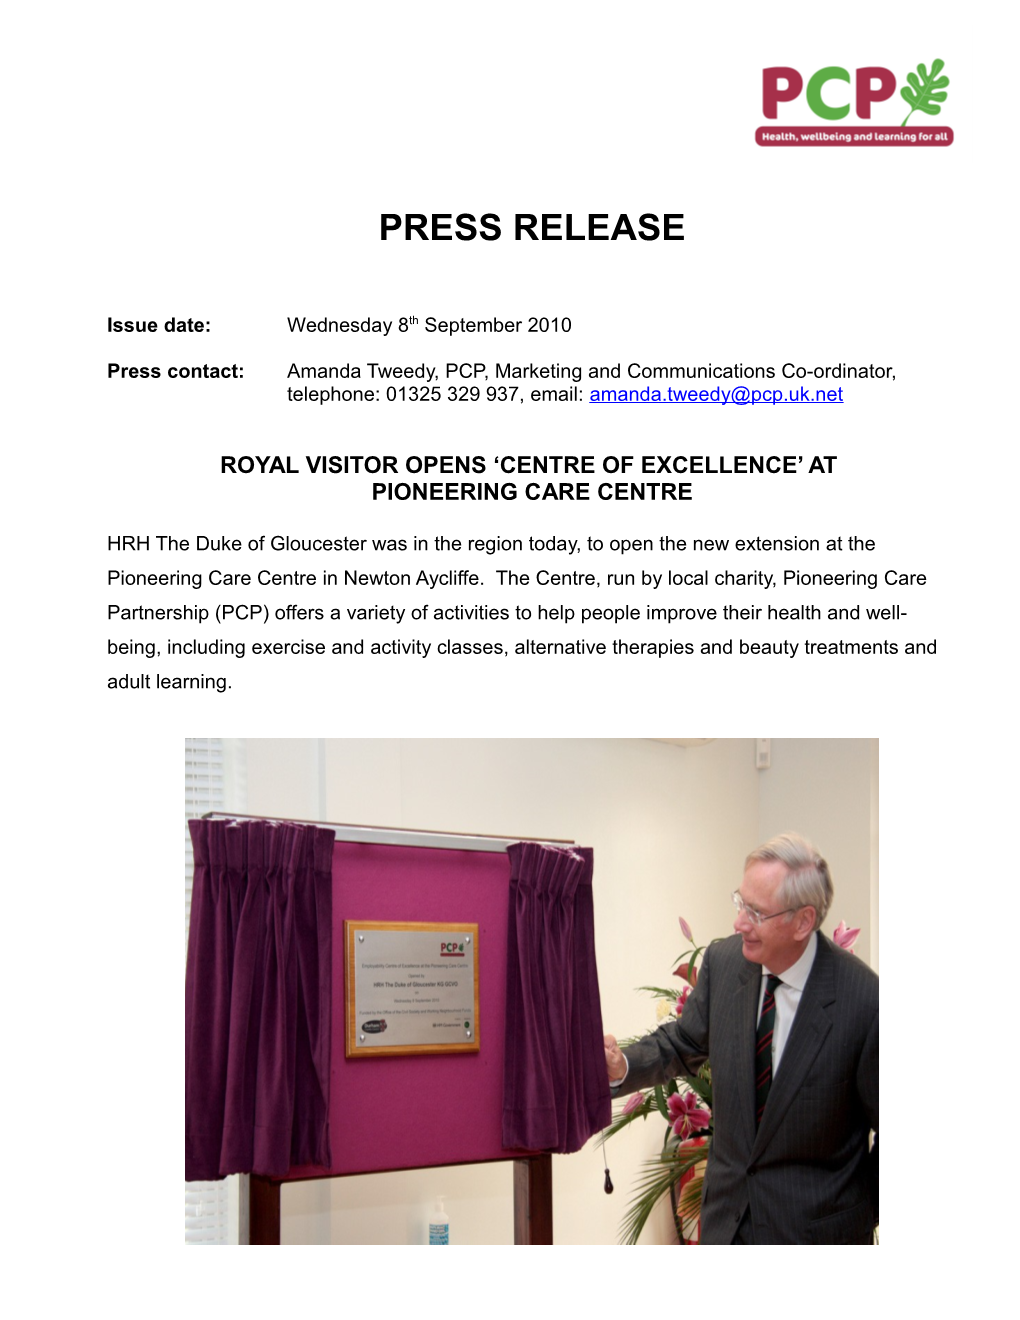 Royal Visitoropens Centre of Excellence At